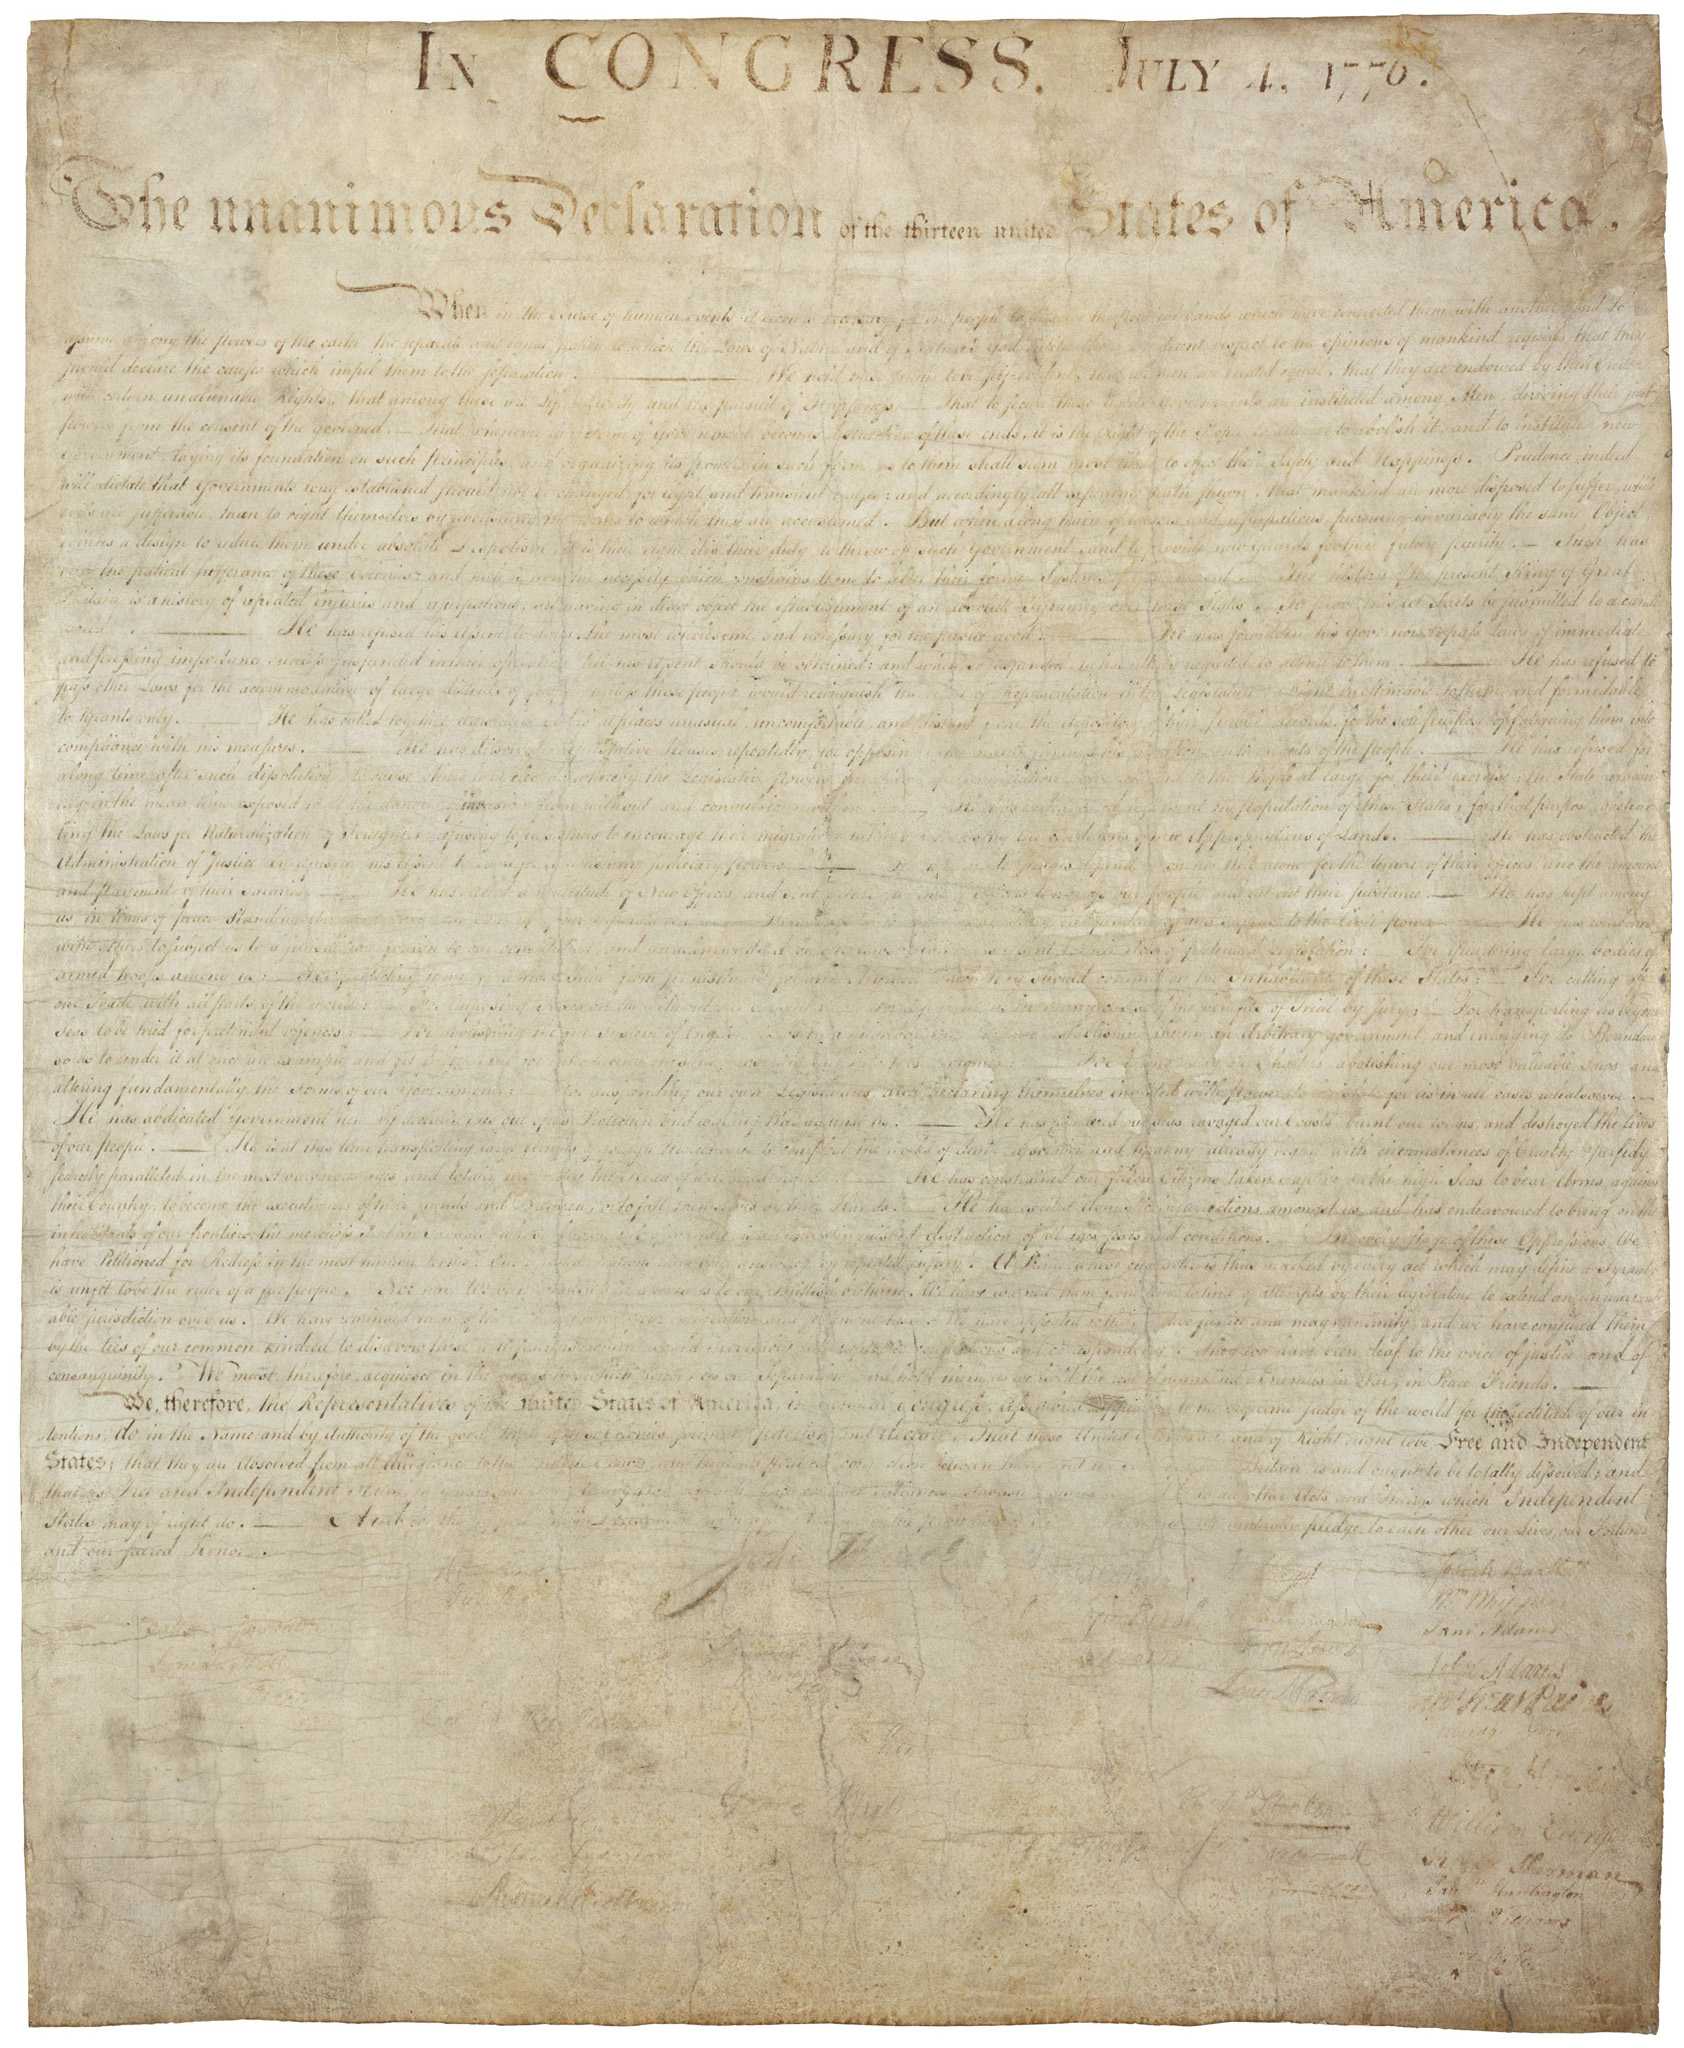 Image of Declaration of Independence, 1776